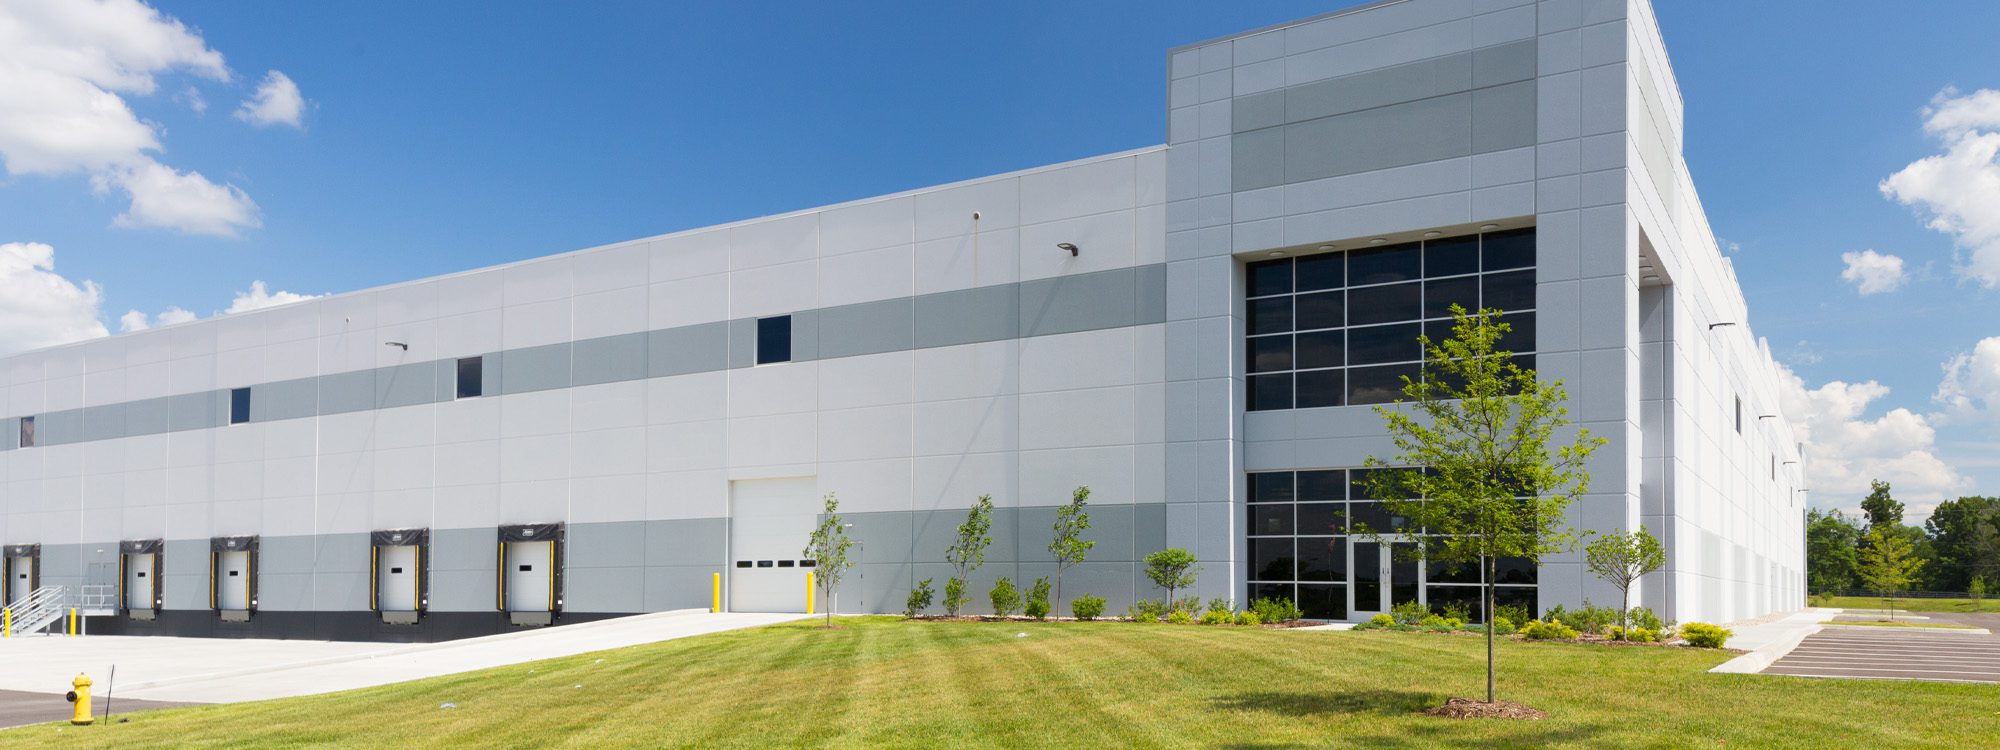 Blankenbaker Logistics Center - 322,831 SF of industrial space available in Louisville, Kentucky